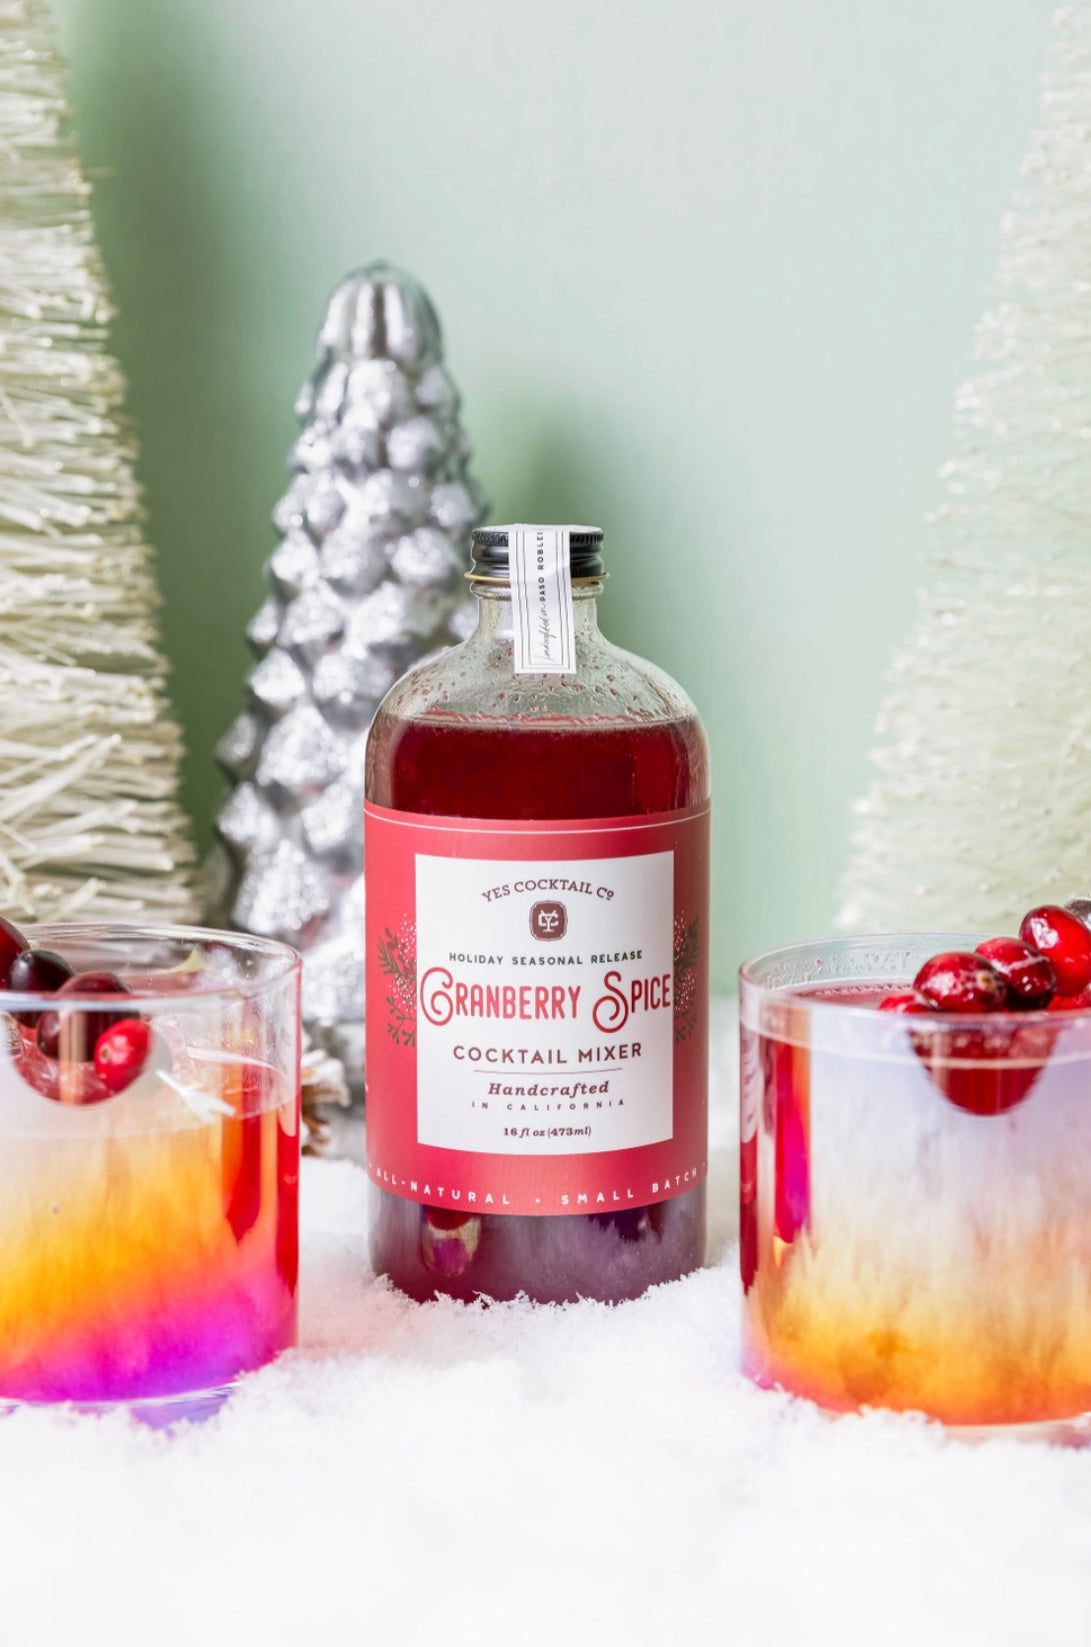 16 oz bottle of handcrafted Cranberry Spice Cocktail Mixer made by Yes Cocktail Co displayed with finished cocktails in iridescent double old fashioned glasses that are garnished with fresh cranberries. Fake snow is spread on the table with decorative Christmas tree shaped decorations in the background.